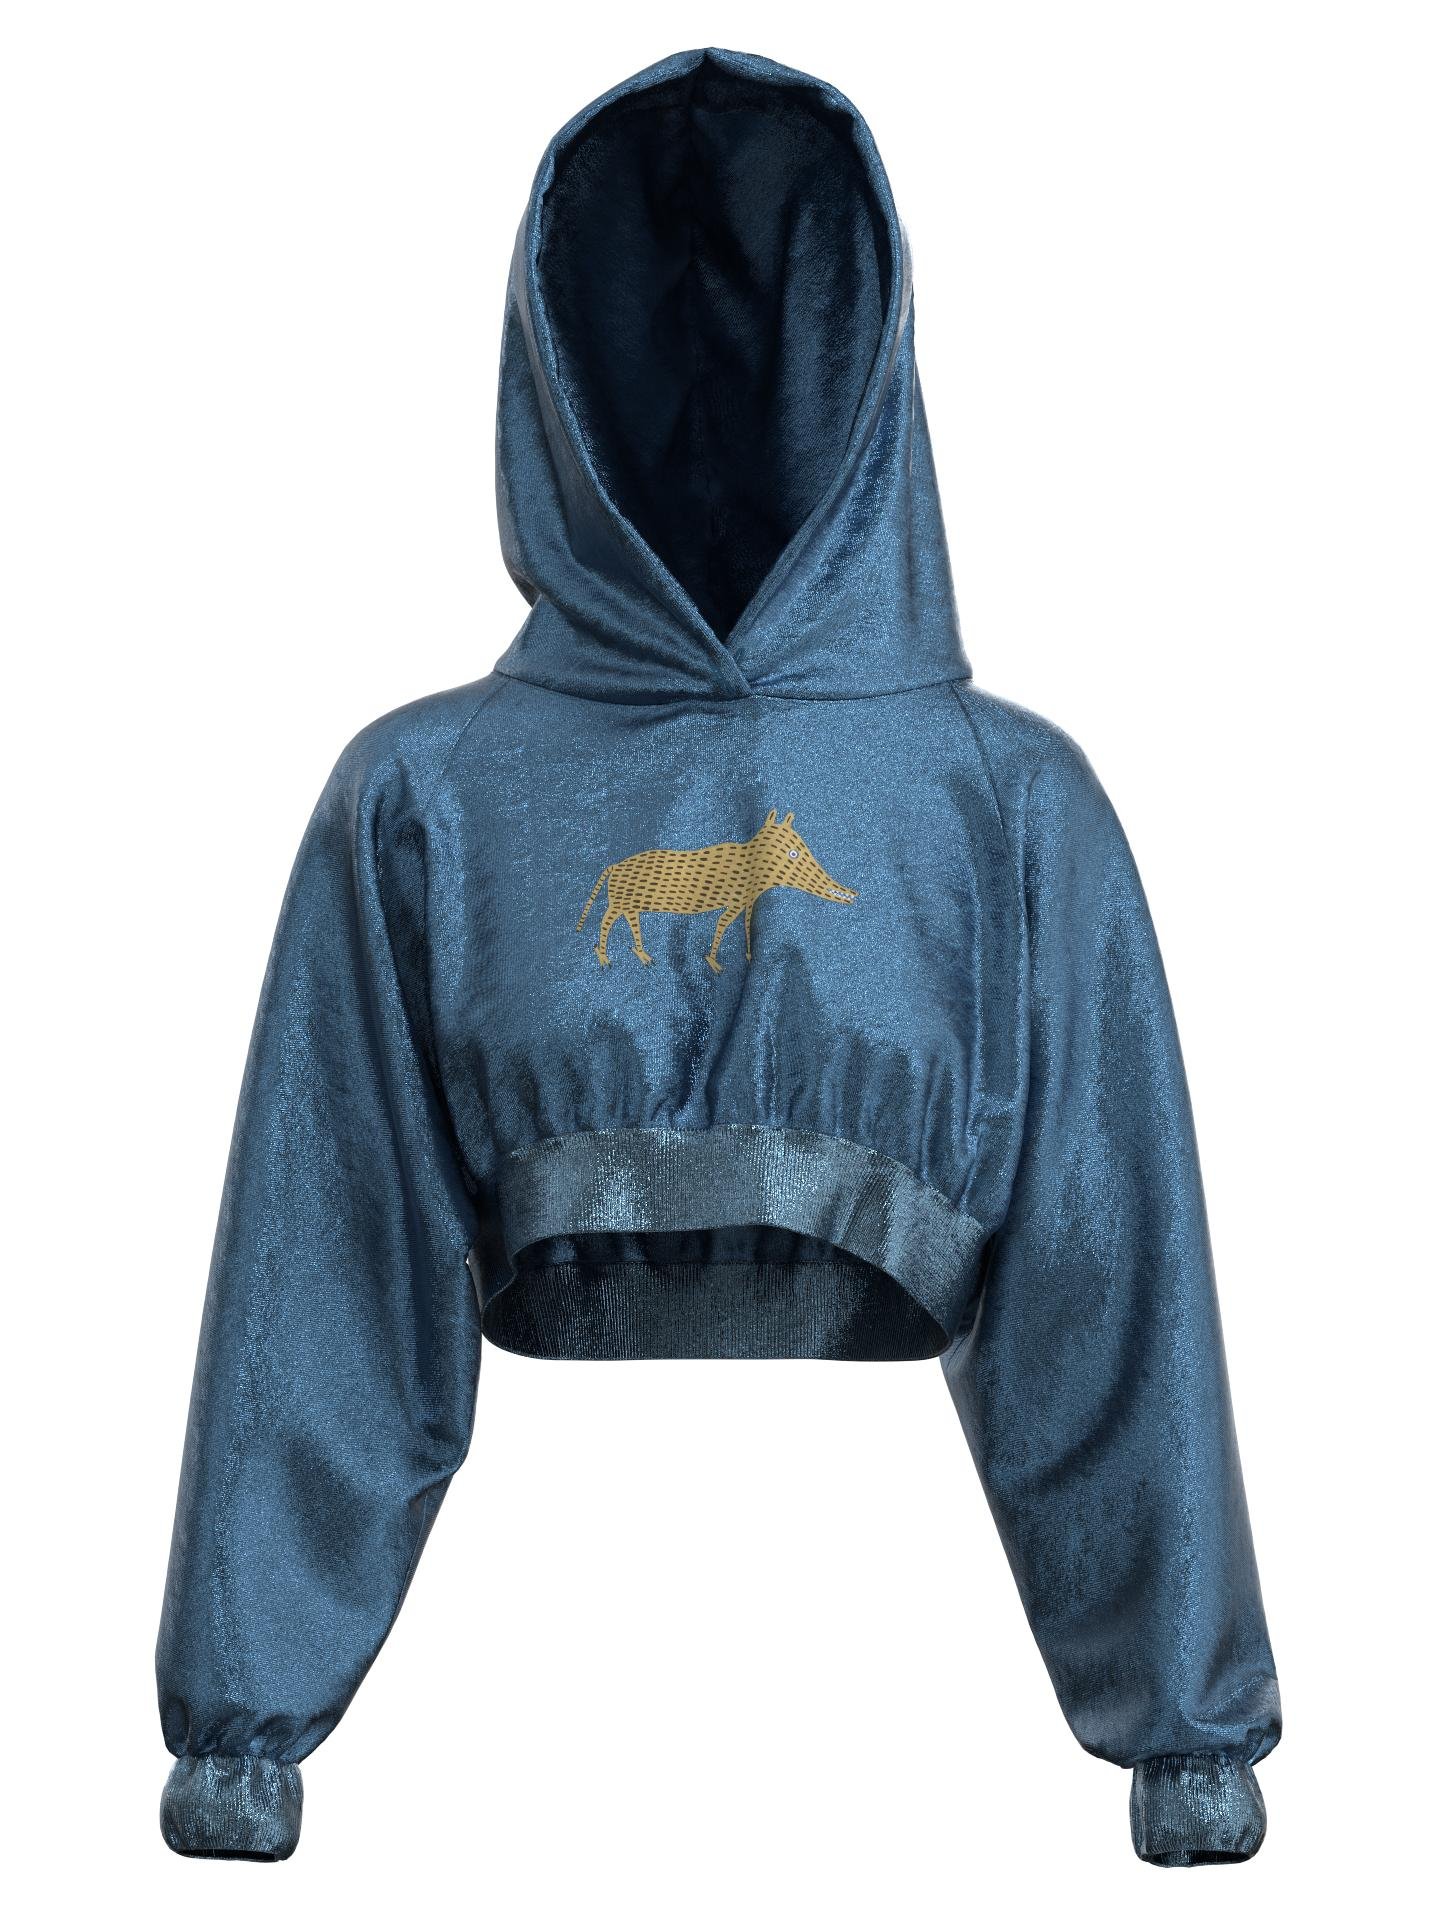 PPPARTEM: Pup Hoodie by SUPPORT UKRAINE COLLECTION